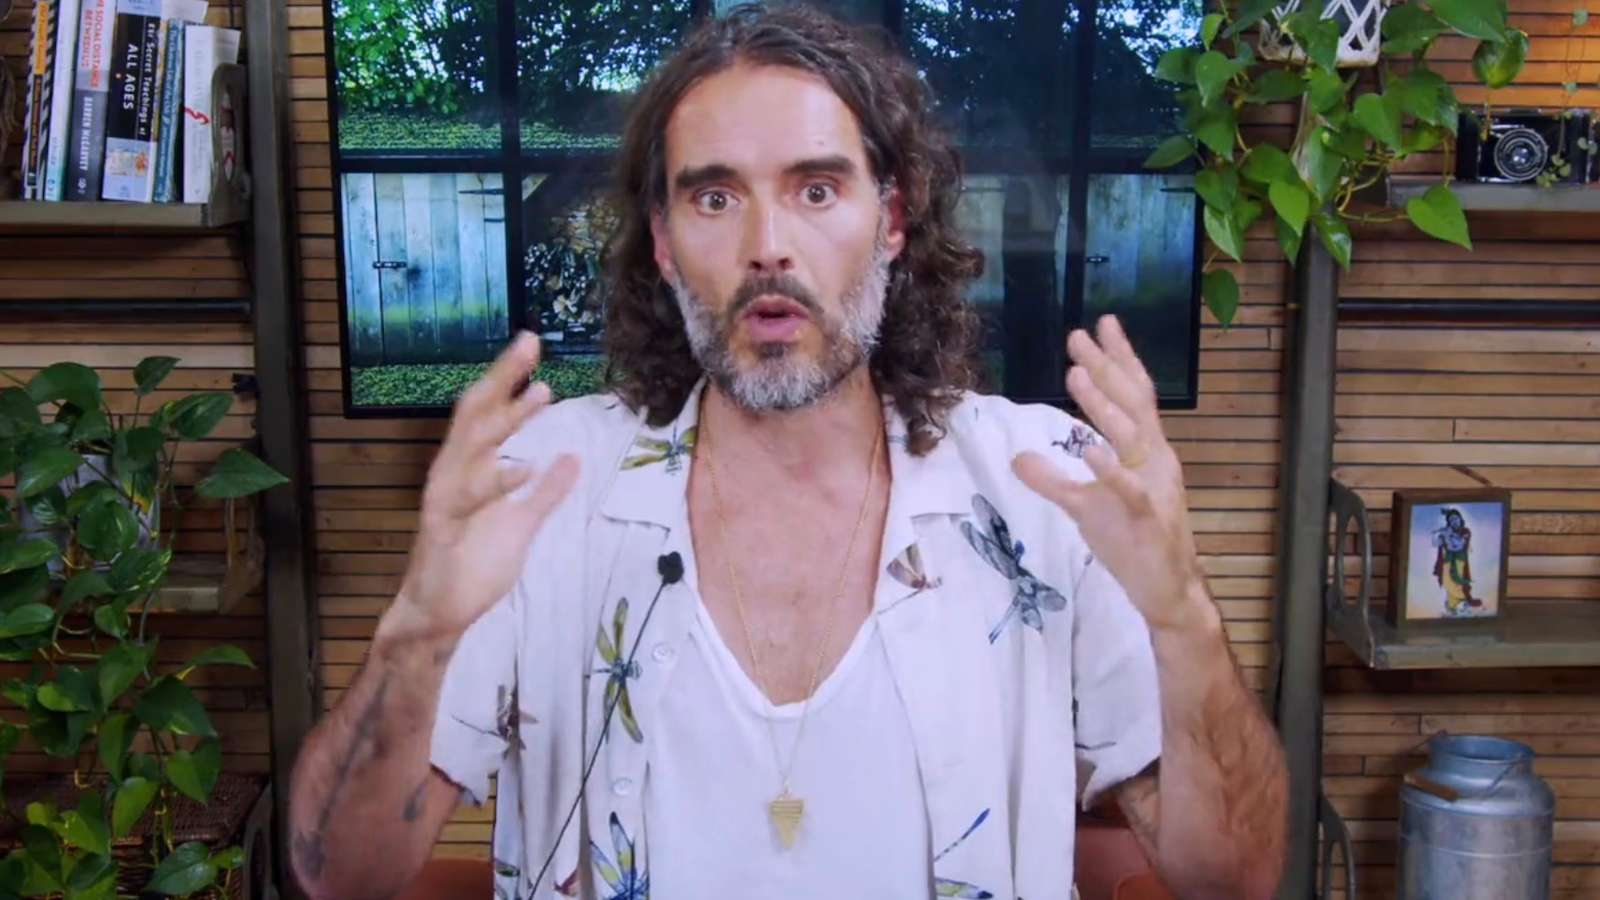 Russell Brand shared a video in which he denied the allegations